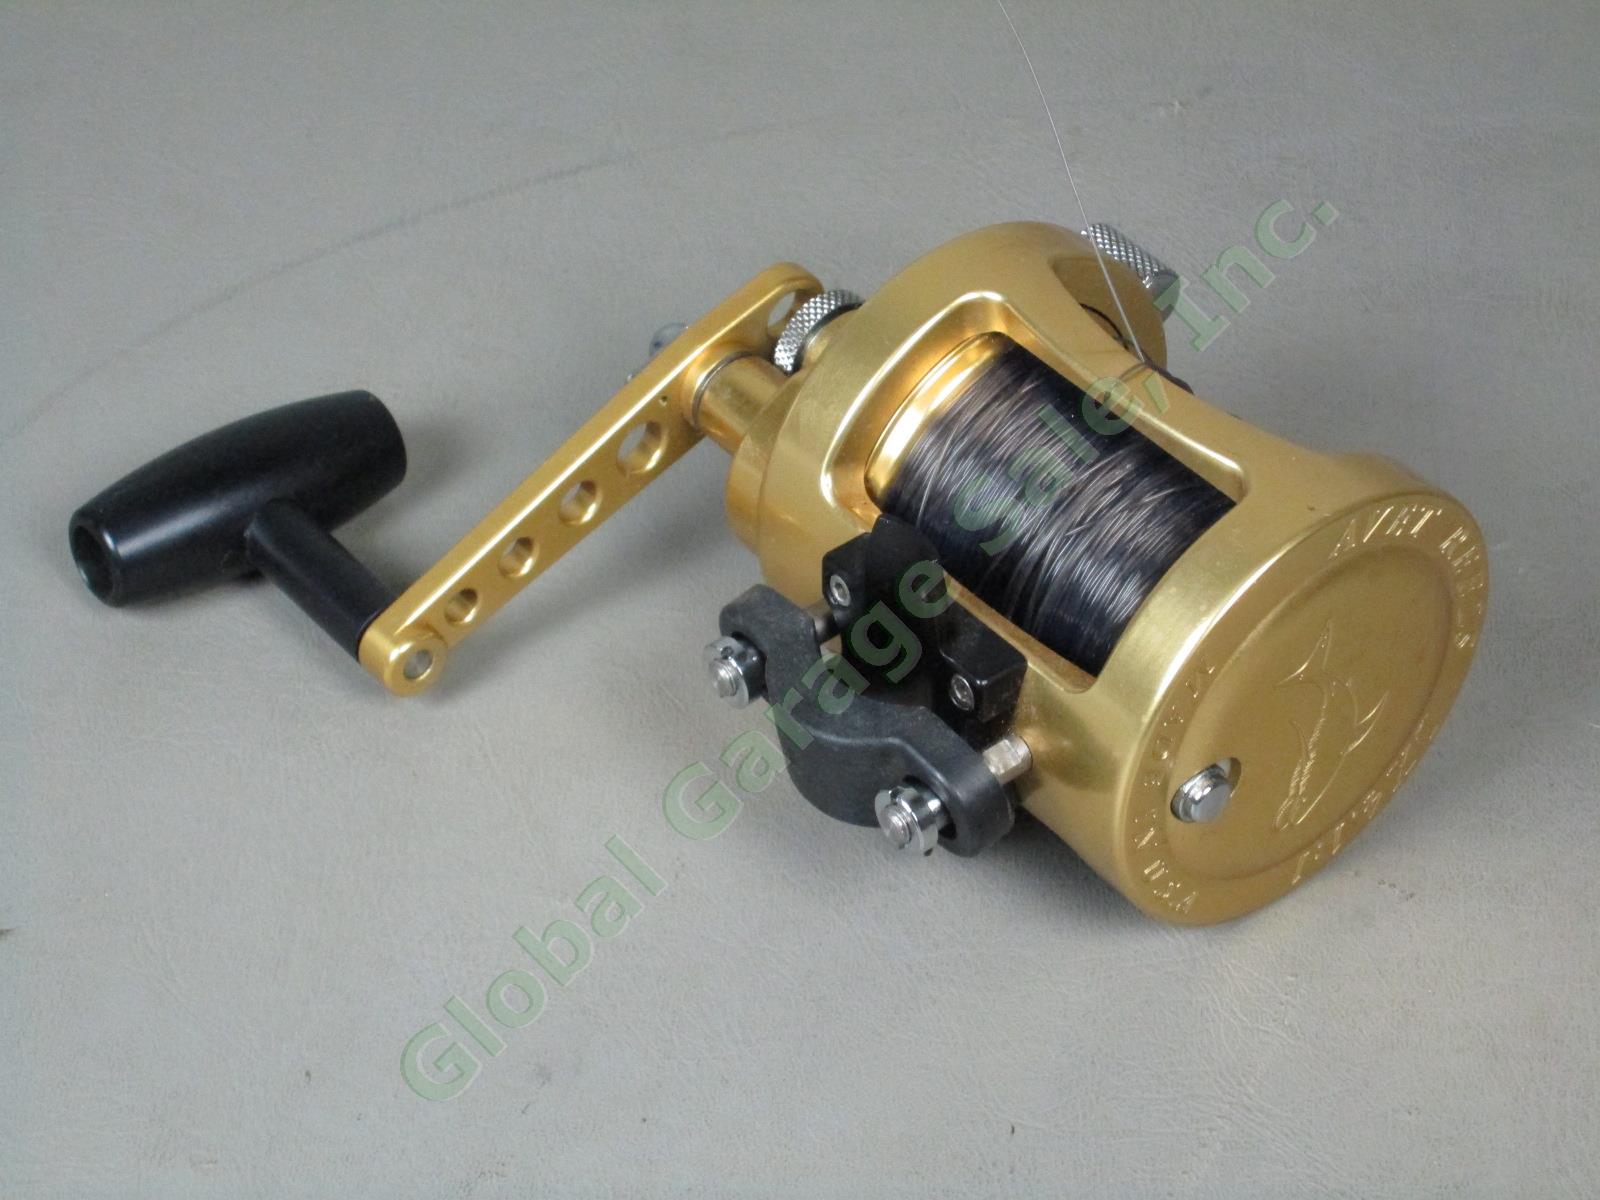 Avet LX 4.1.1 Lever Drag Gold Fishing Reel Stainless Bearings USA Made EXC+ Cond 2